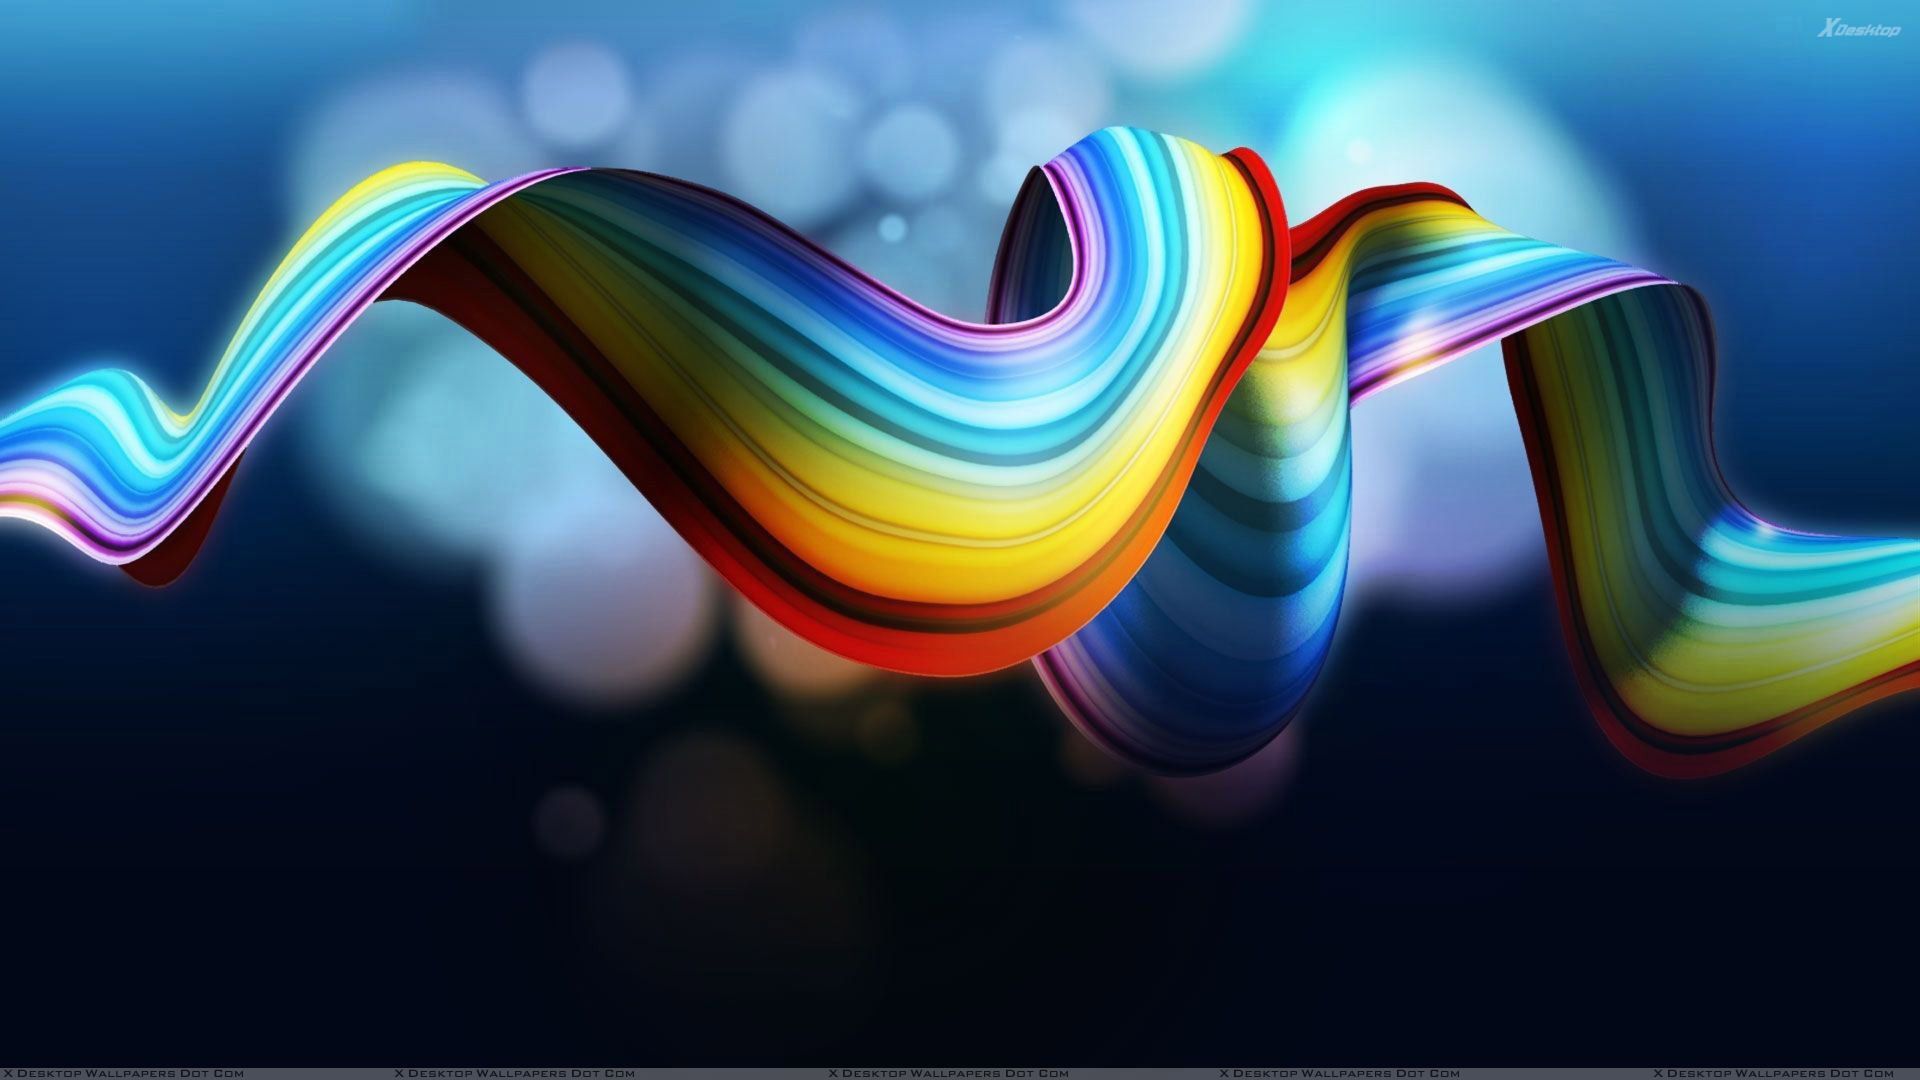 hd wallpaper rainbow abstract backgrounds | wallpapers55.com ...